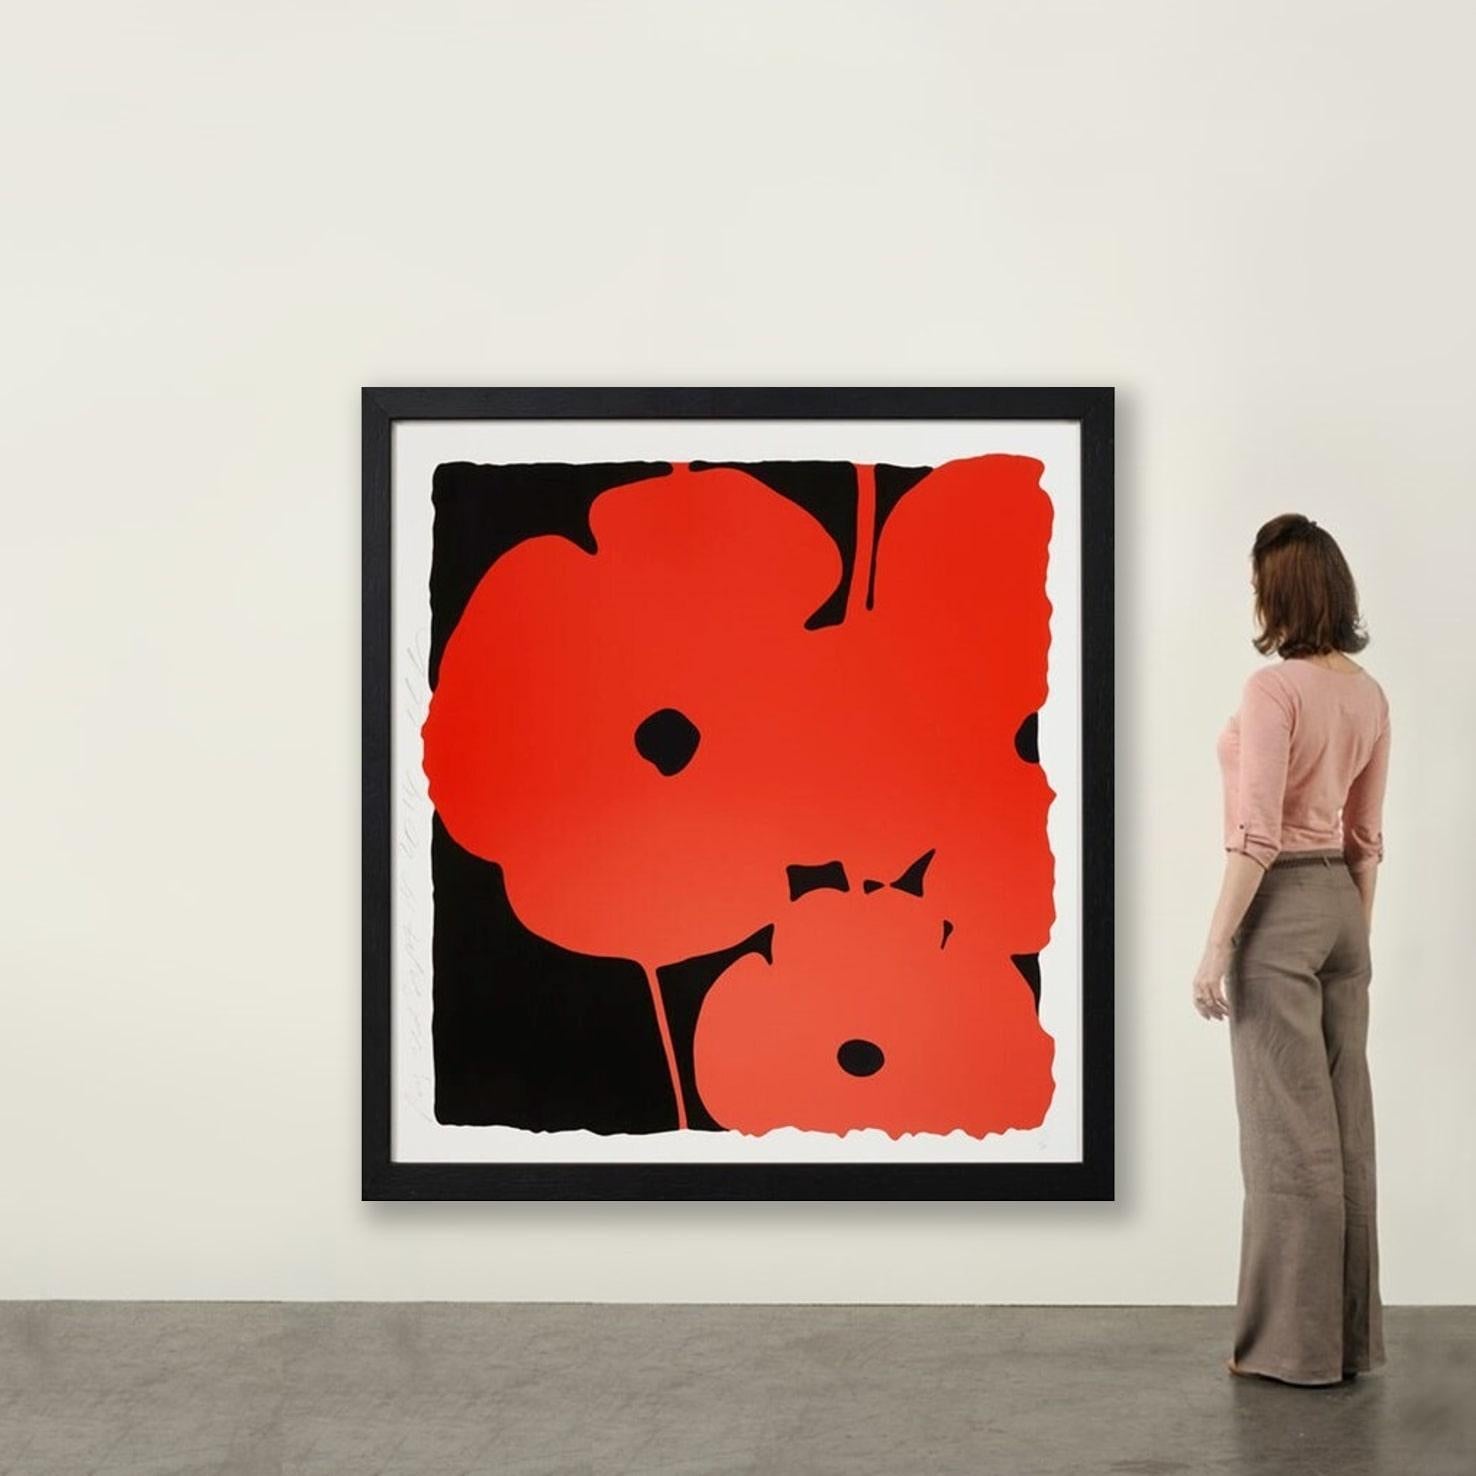 Donald Sultan, Big Poppies
Silkscreen (Portfolio of 3)
Edition of 30
153 x 153 cm (60.2 x 60.2 in)
Signed, dated, numbered, and titled
In mint condition, as acquired from the publisher

PLEASE NOTE: Edition numbers could vary from the one shown in